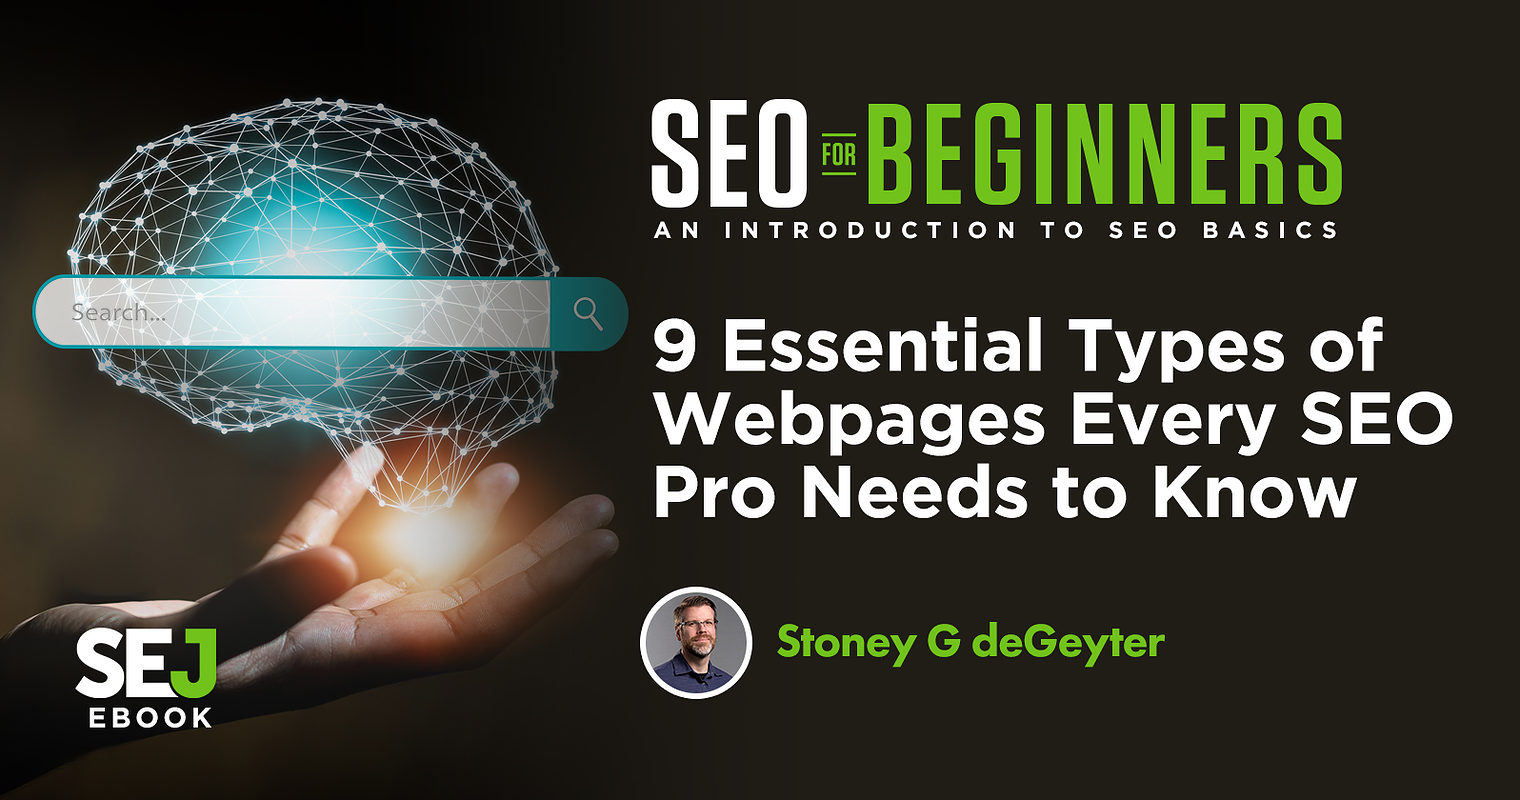 9 Essential Types of Webpages Every SEO Pro Needs to Know